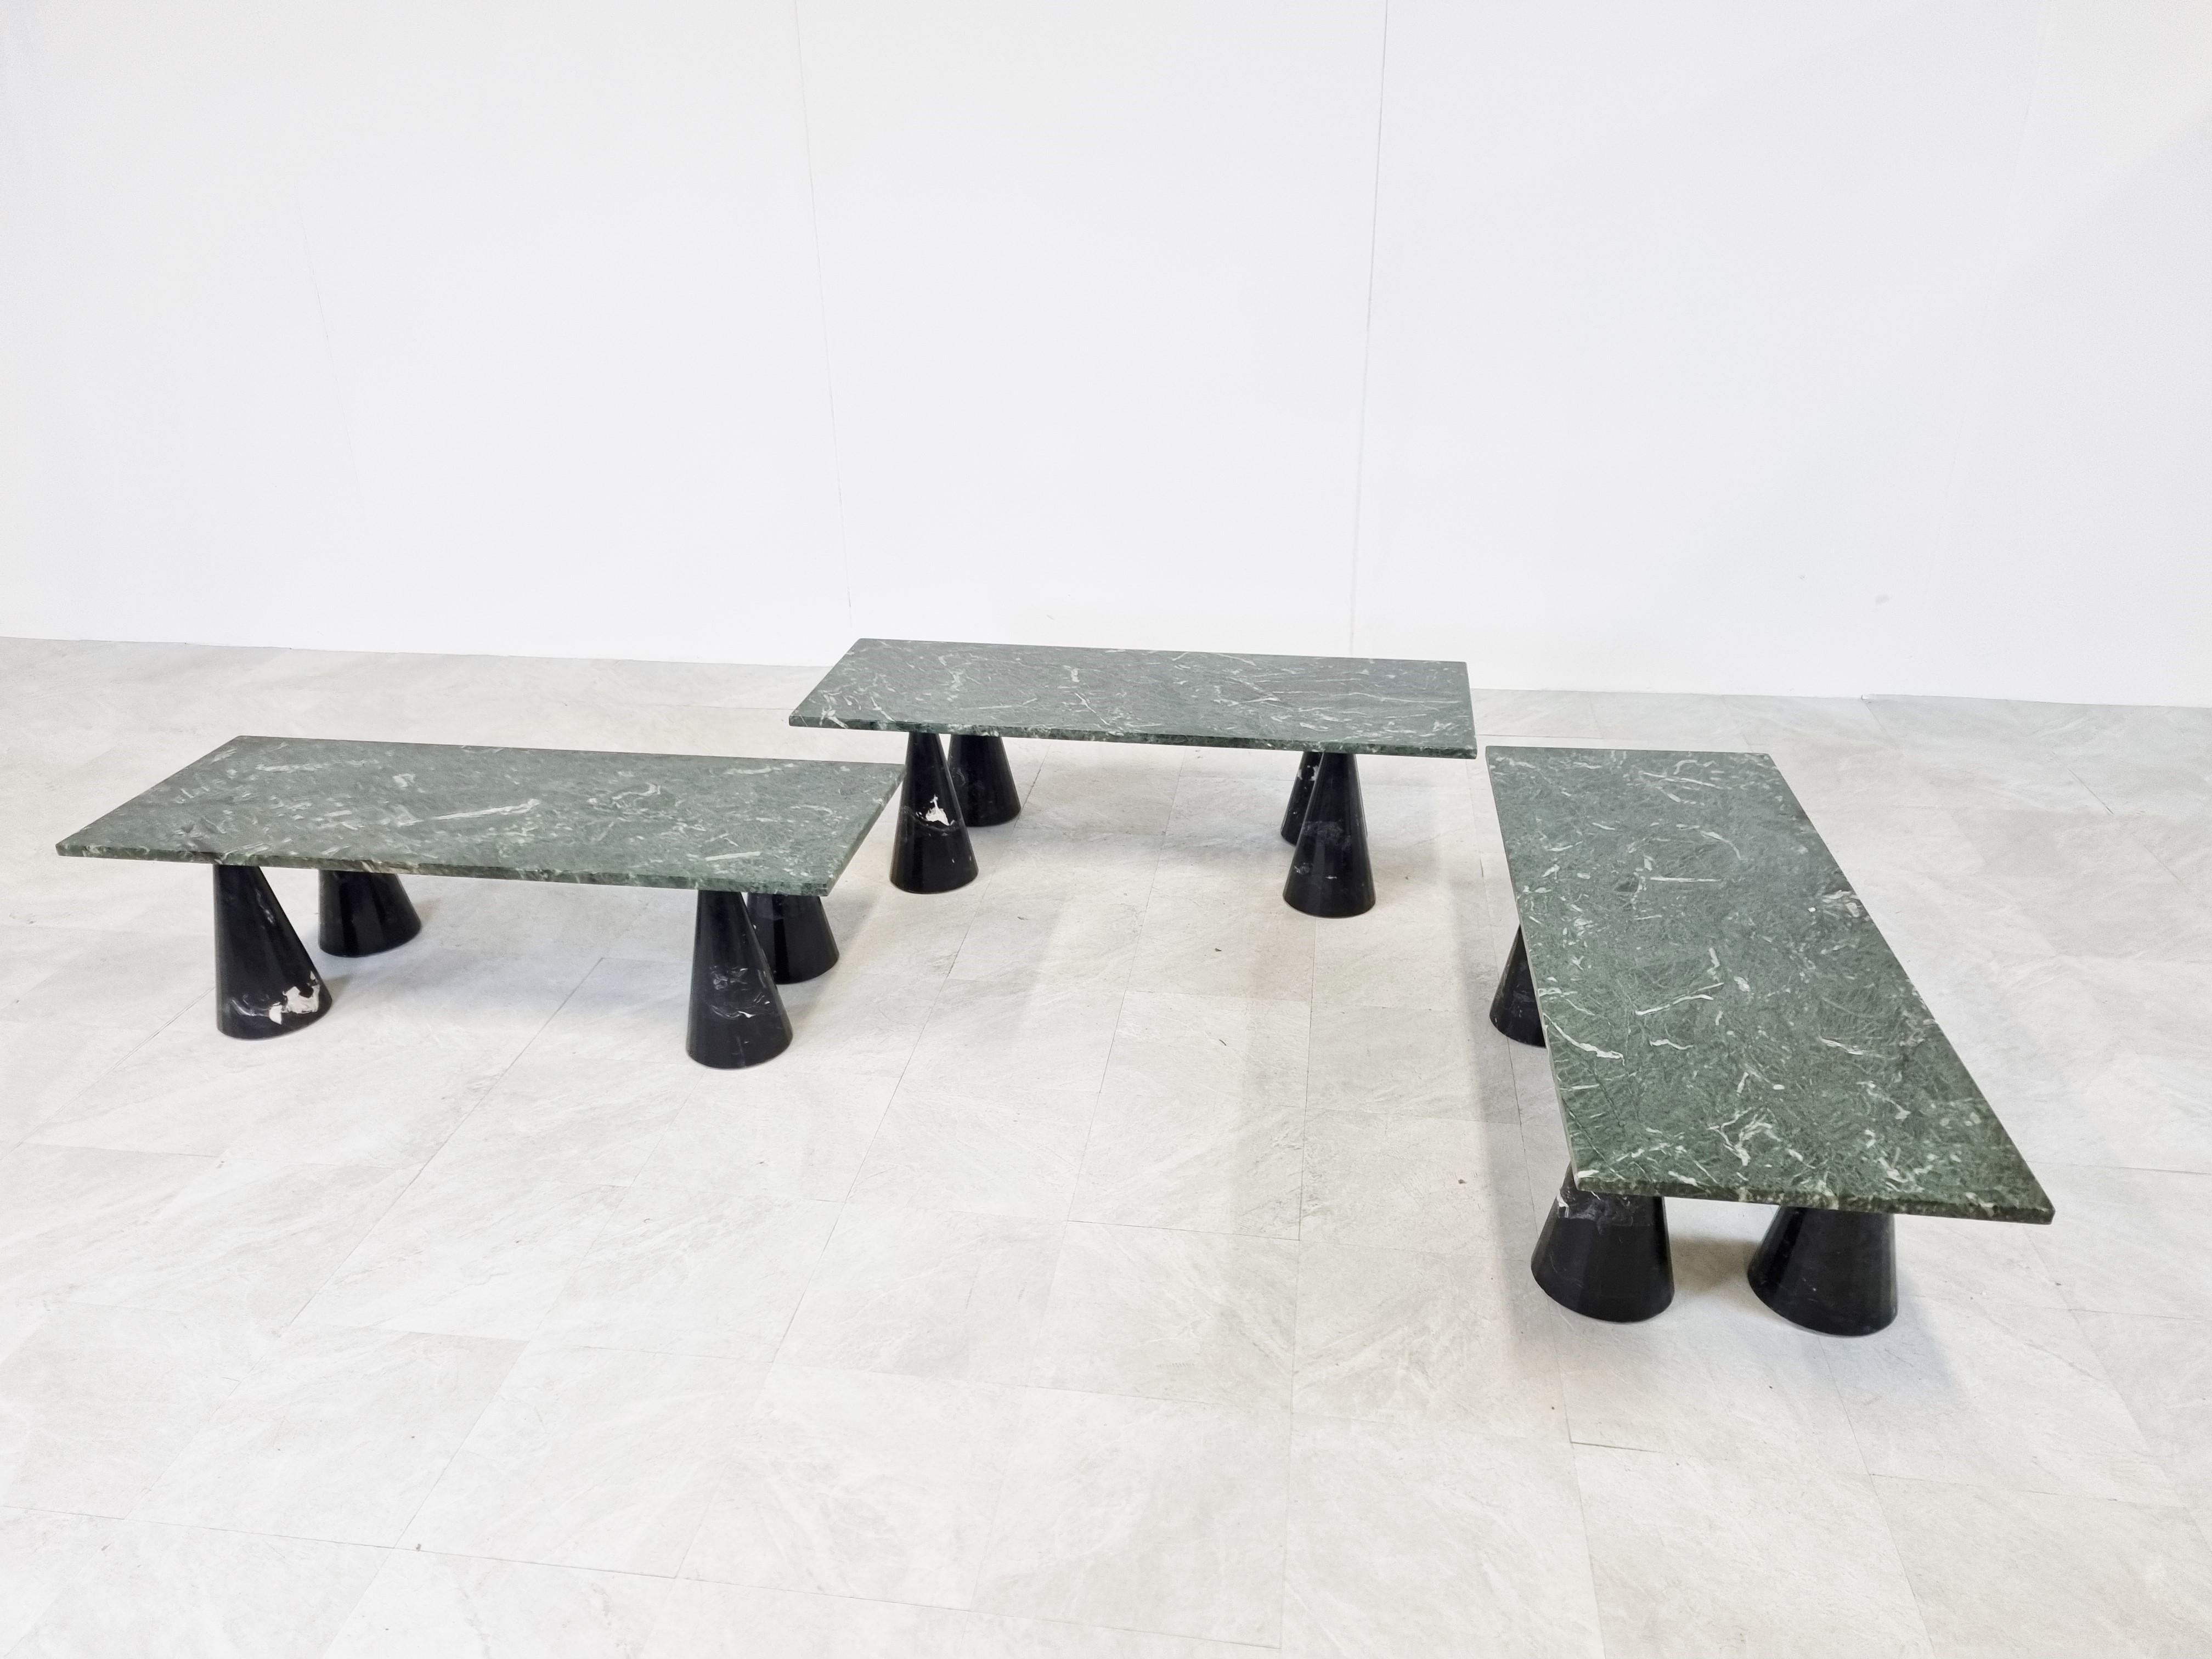 Set of playful design marble coffee tables with black marble conical legs and dark green marble table tops.

The tables can be placed in multiple setups and create a great effect togheter.

Good condition, some small chips to the bases but